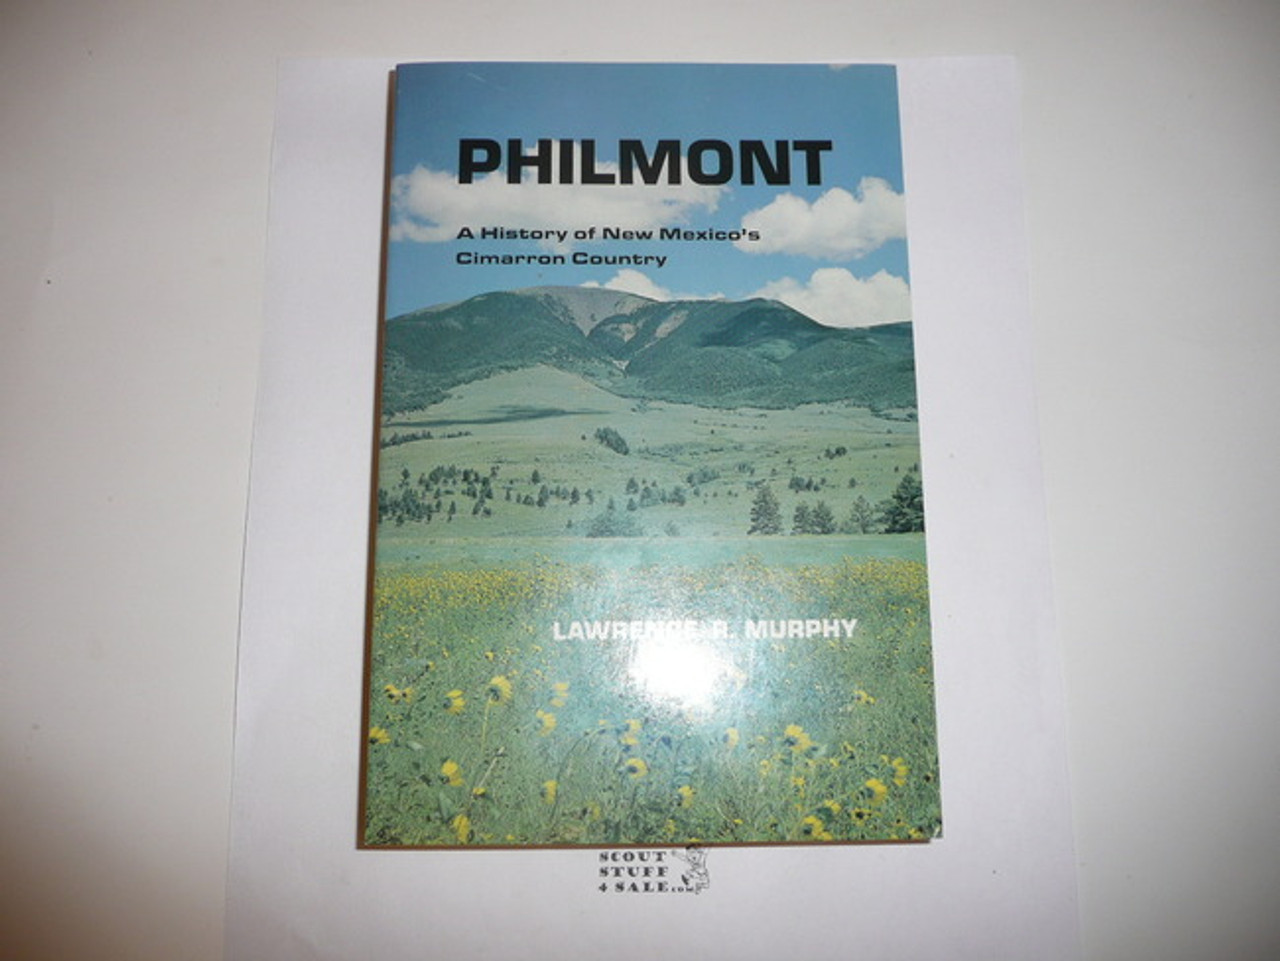 Philmont A History of New Mexico's Cimarron Country, 9th printing, 1993